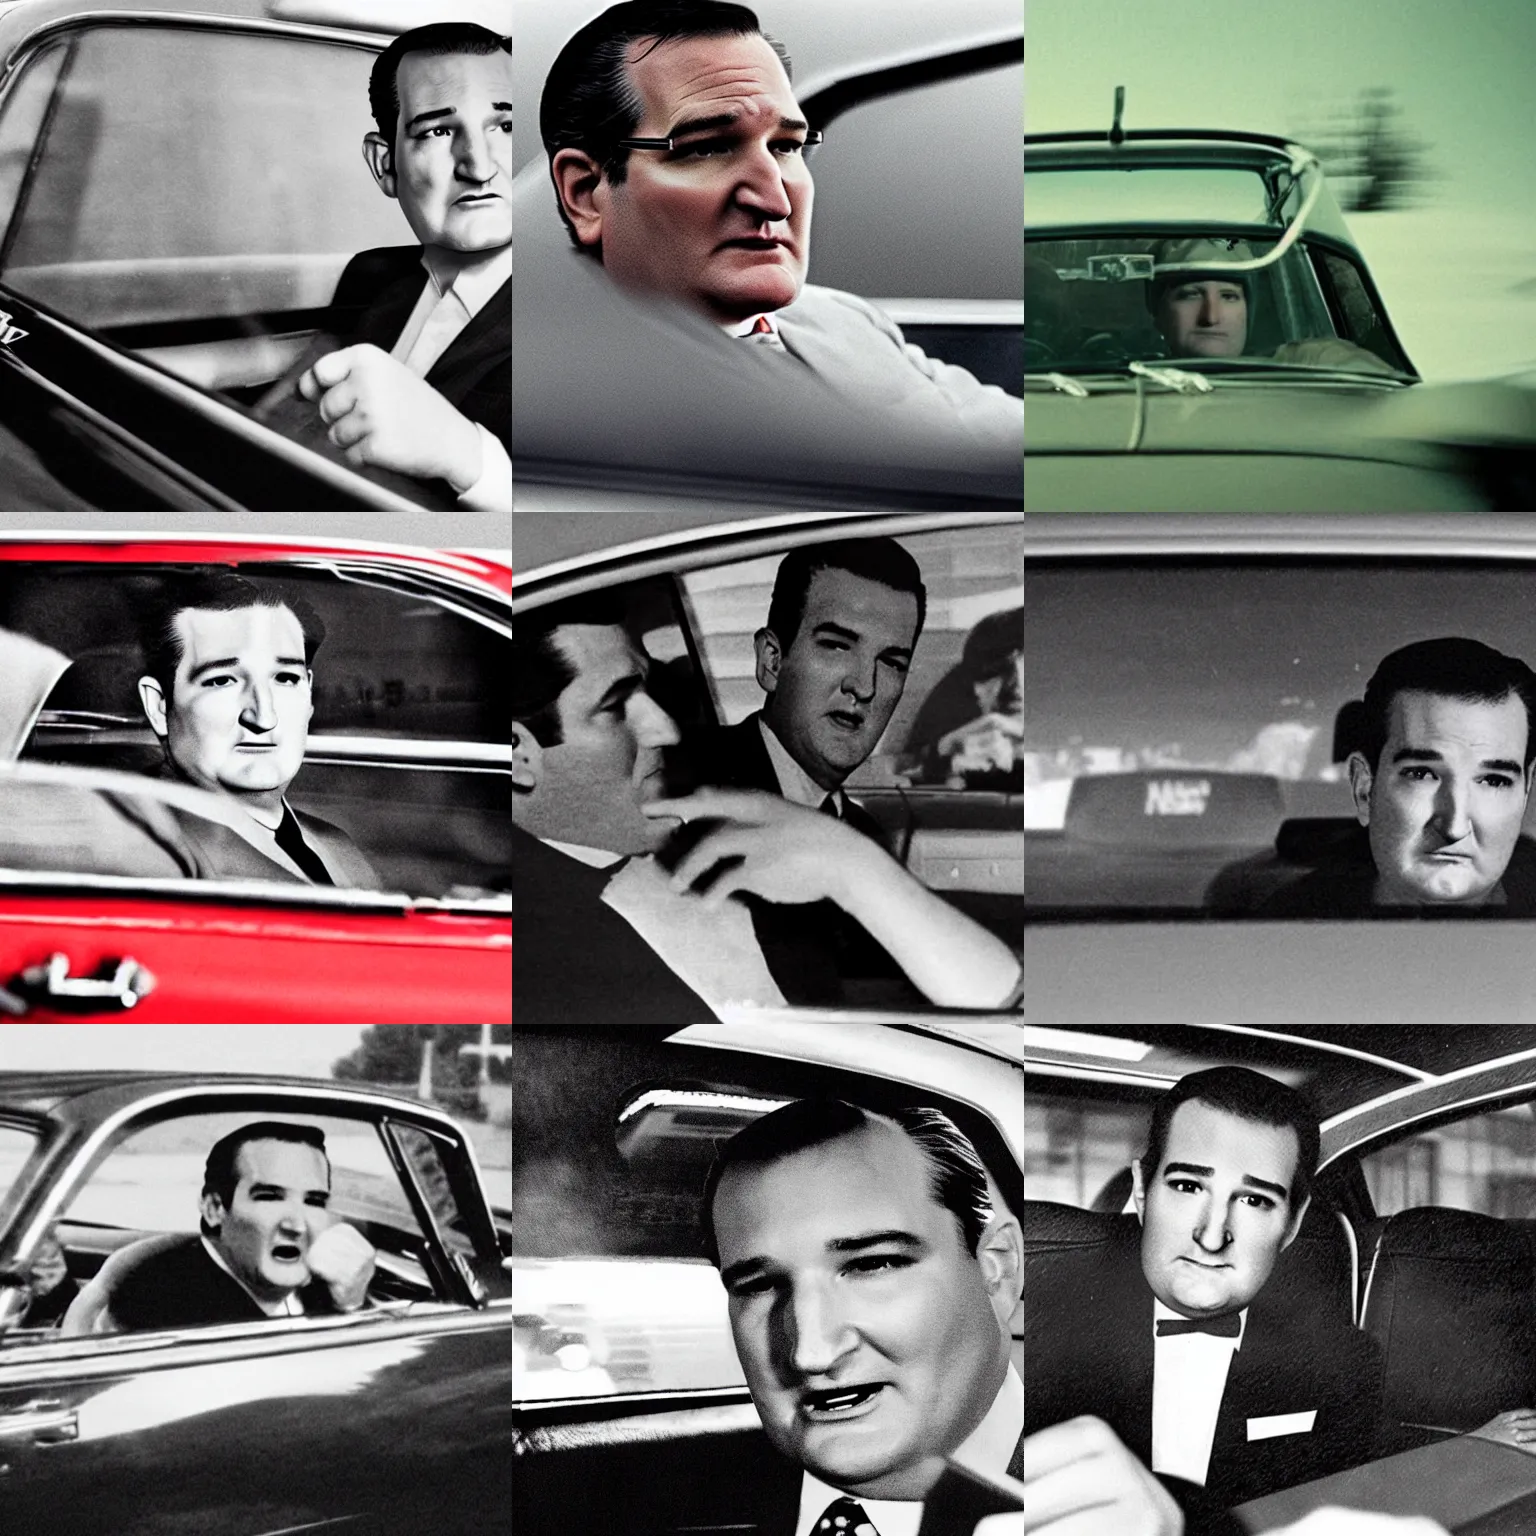 Prompt: Film still depicting Ted Cruz as the Zodiac Killer in a 1960's car late at night with poor visibility, horror, eerie, fear